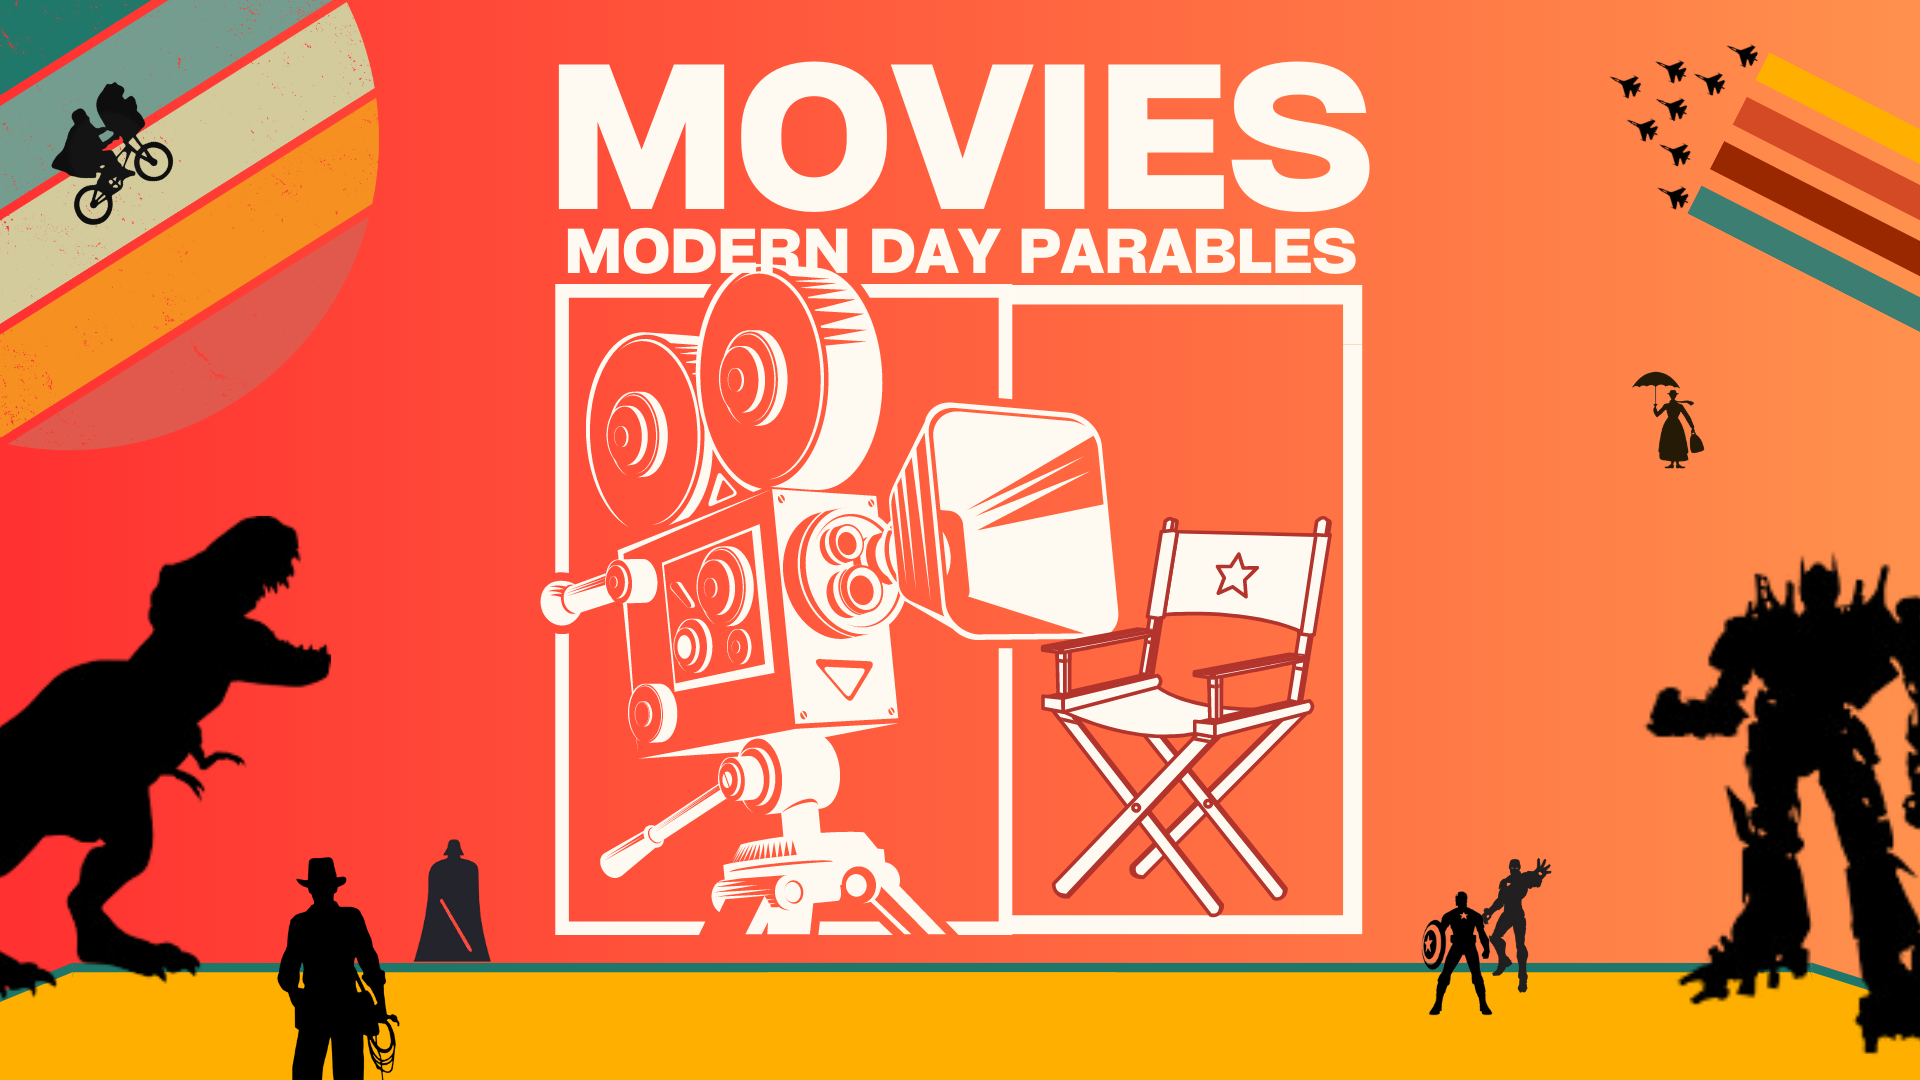 Movies Modern Day Parables, Week 3